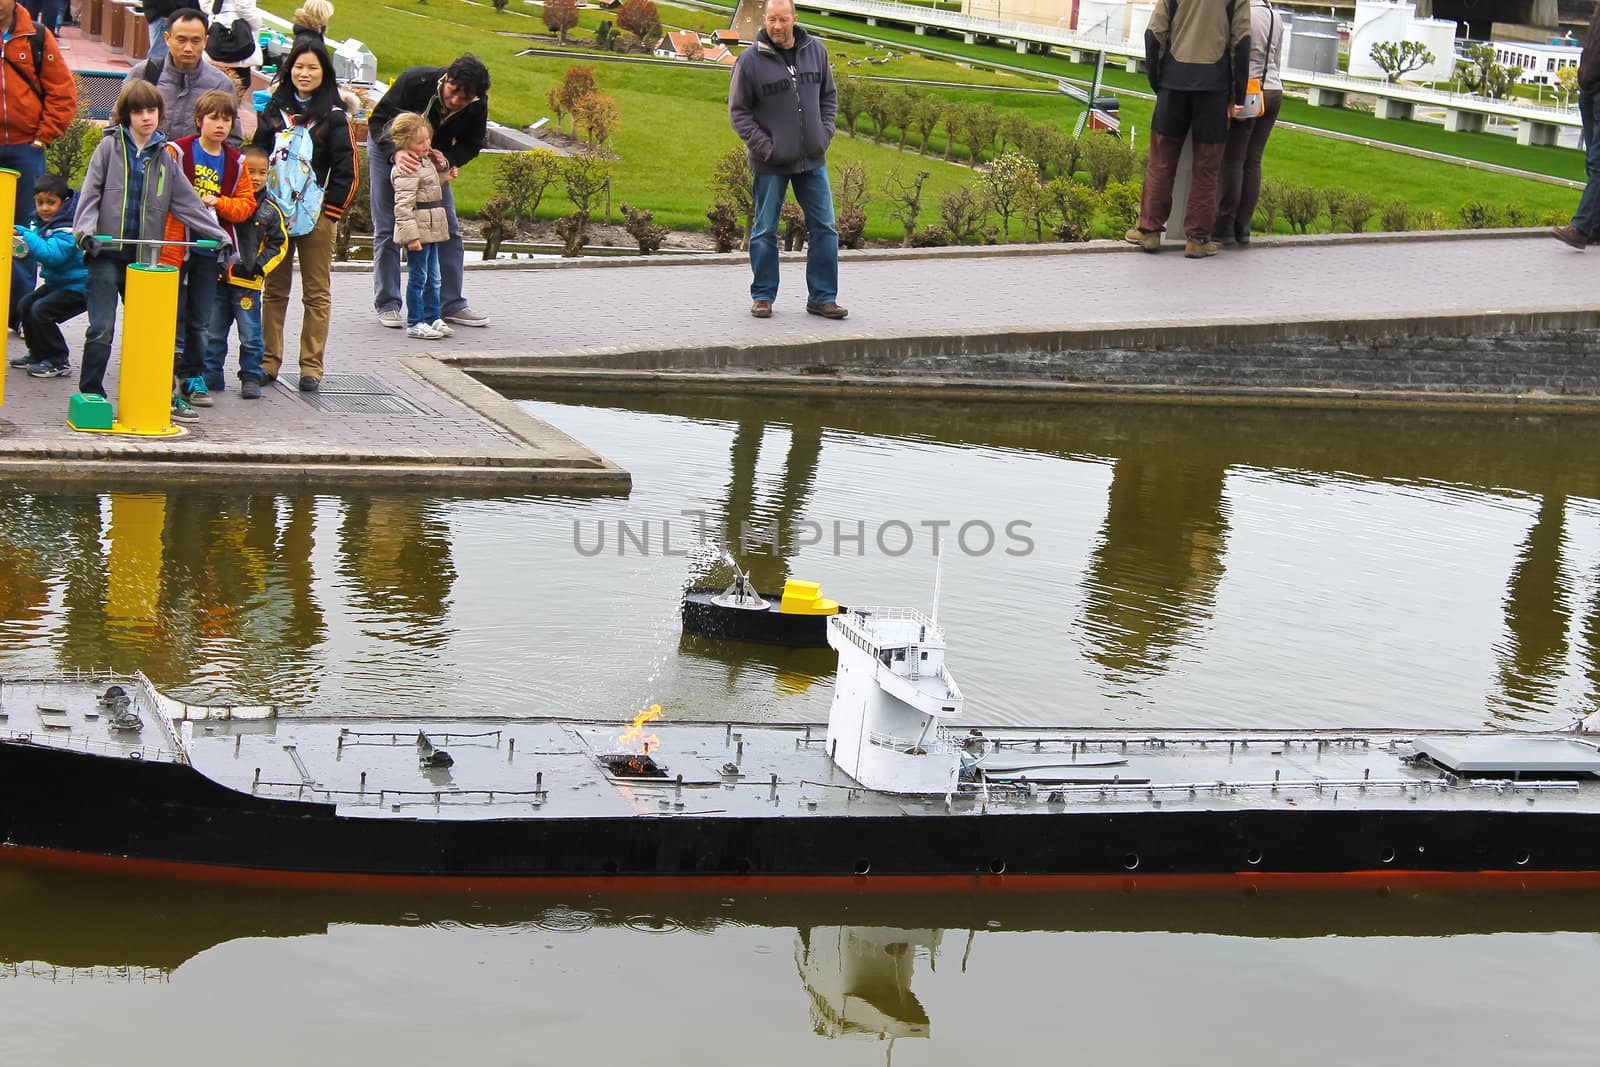 THE HAGUE, NETHERLANDS - APRIL 7: Visiting tourists Madurodam exposition updated April 7, 2012 in Den Haag, The Netherlands